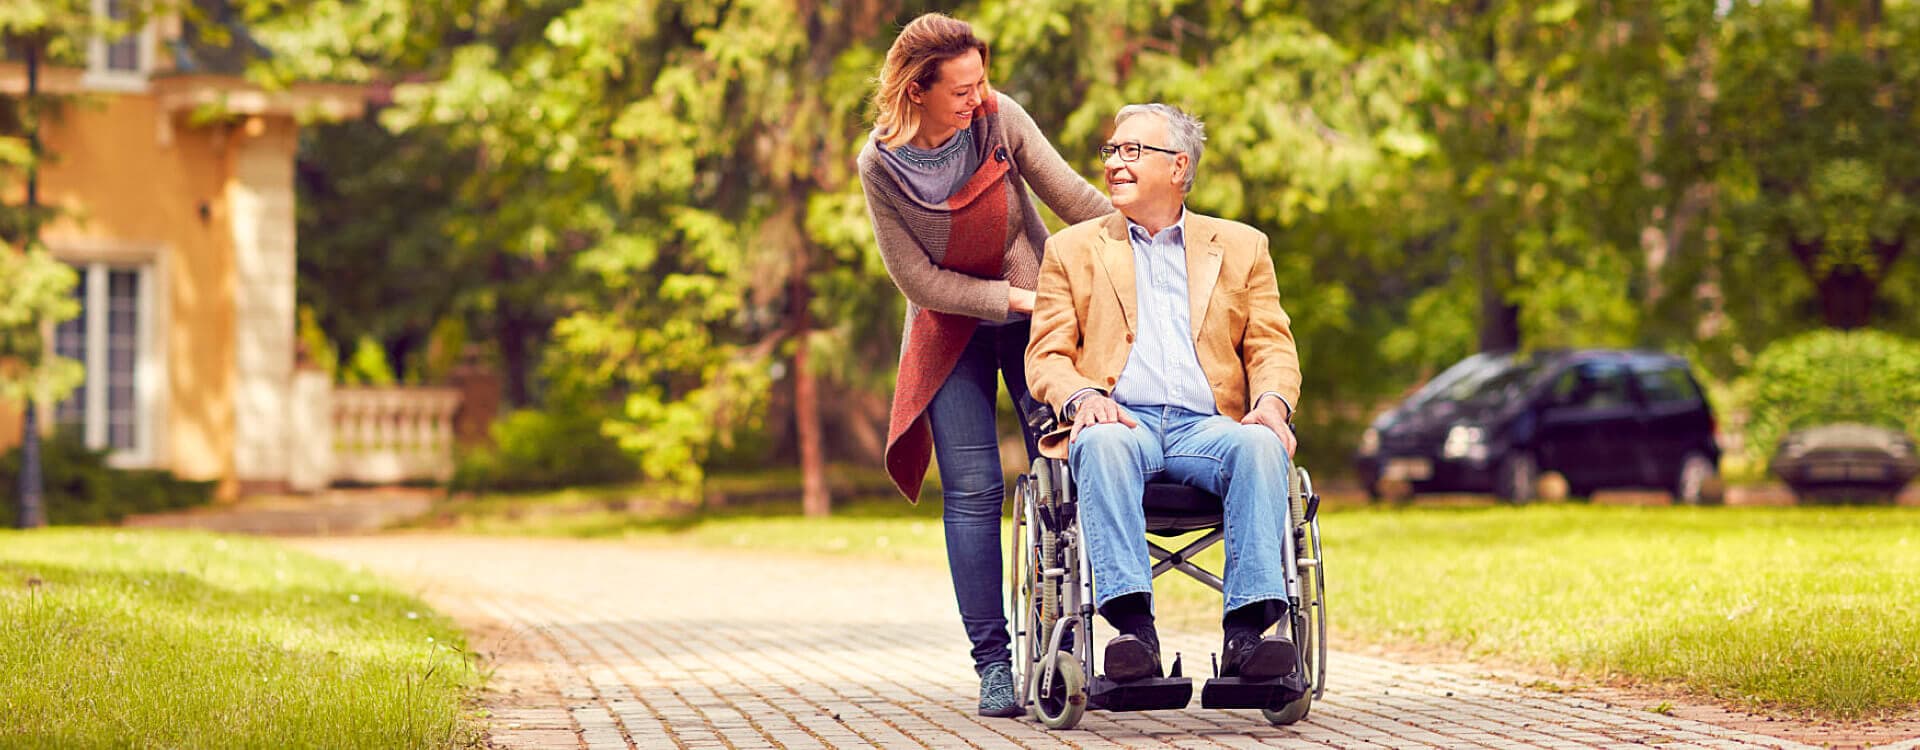 caregiver and patient in a wheelchair looking at each other